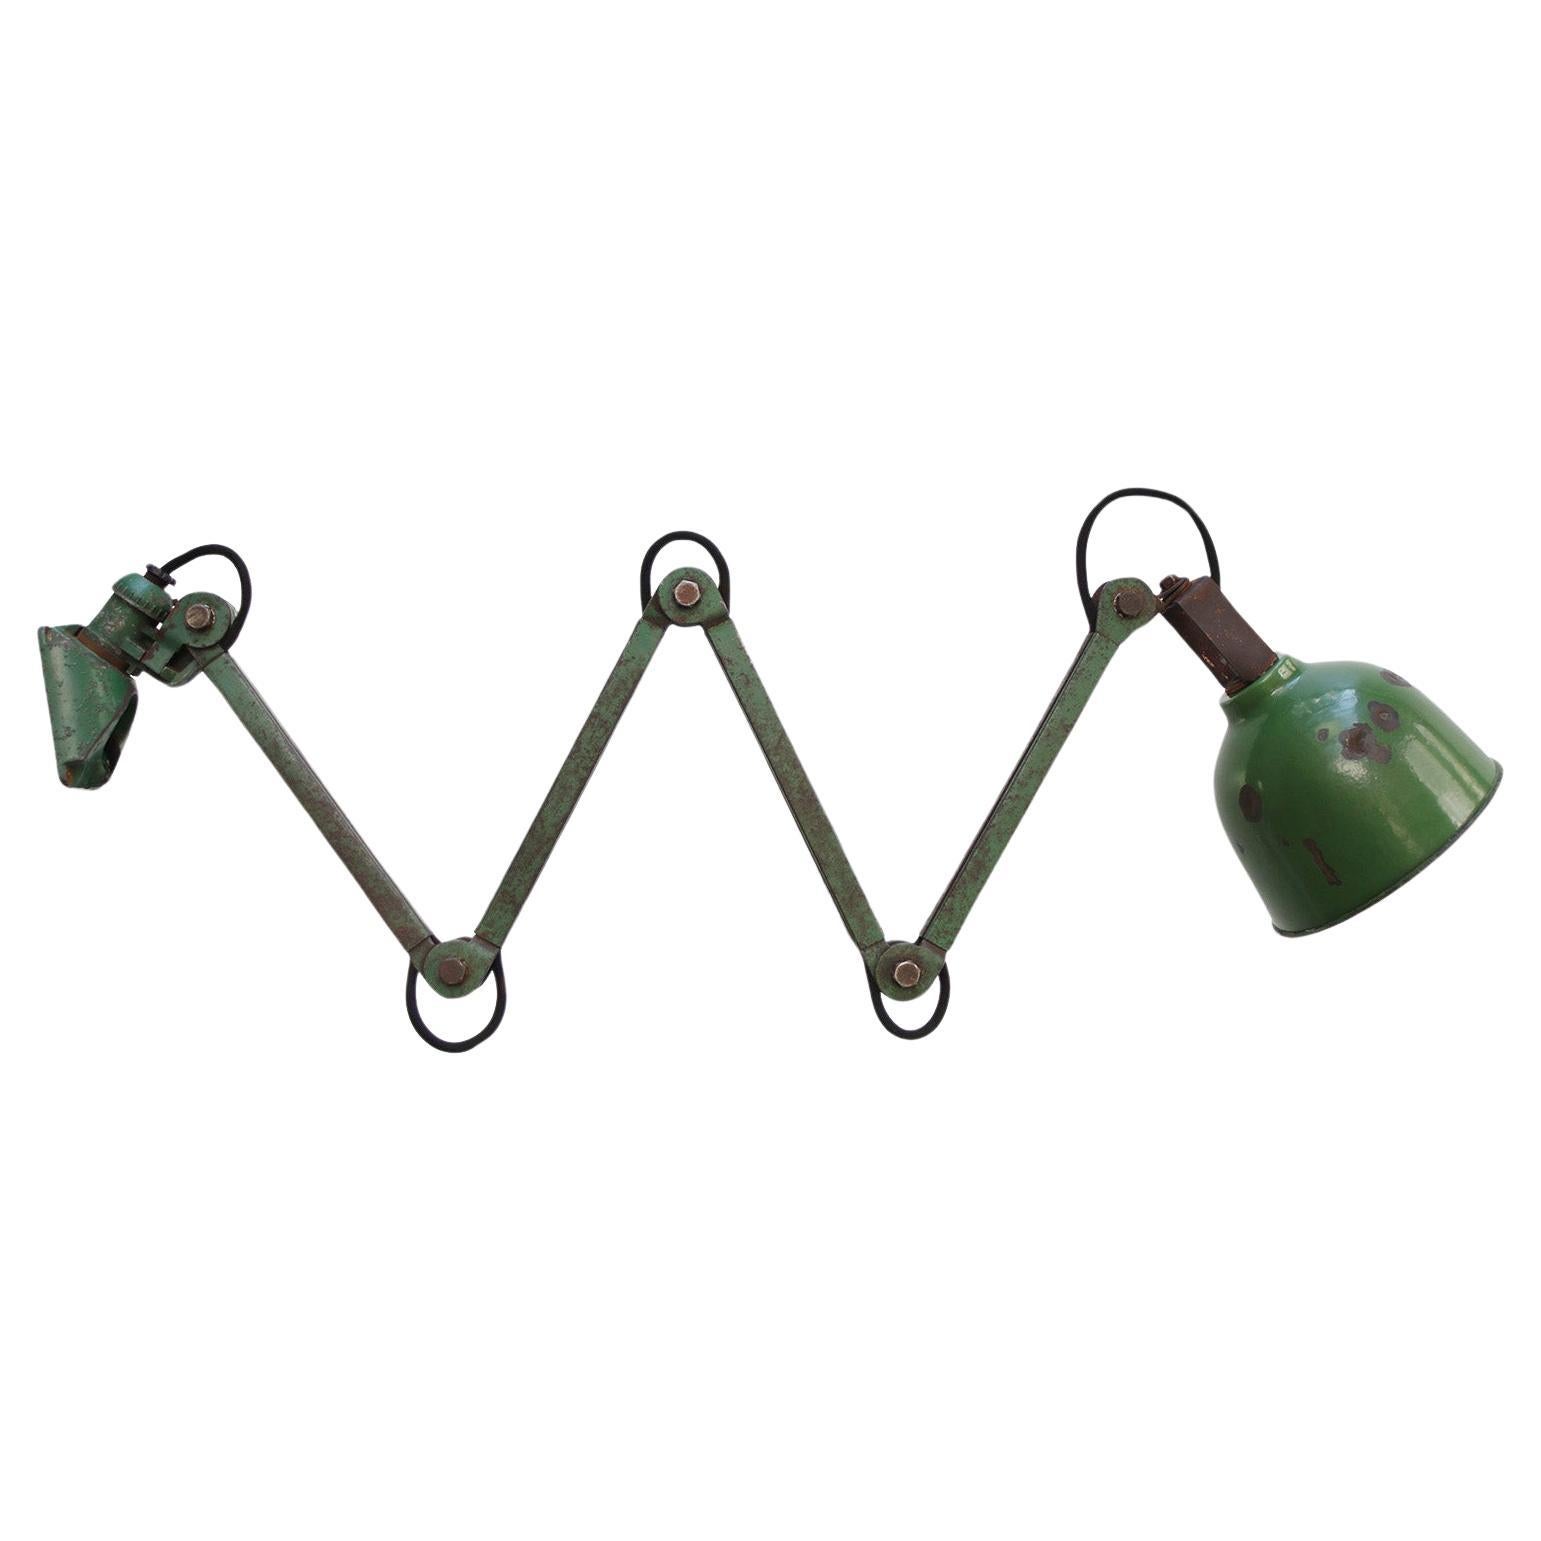 Green 4-Arm Metal Vintage Industrial Machinist Work Wall Light by Dugdills, UK For Sale